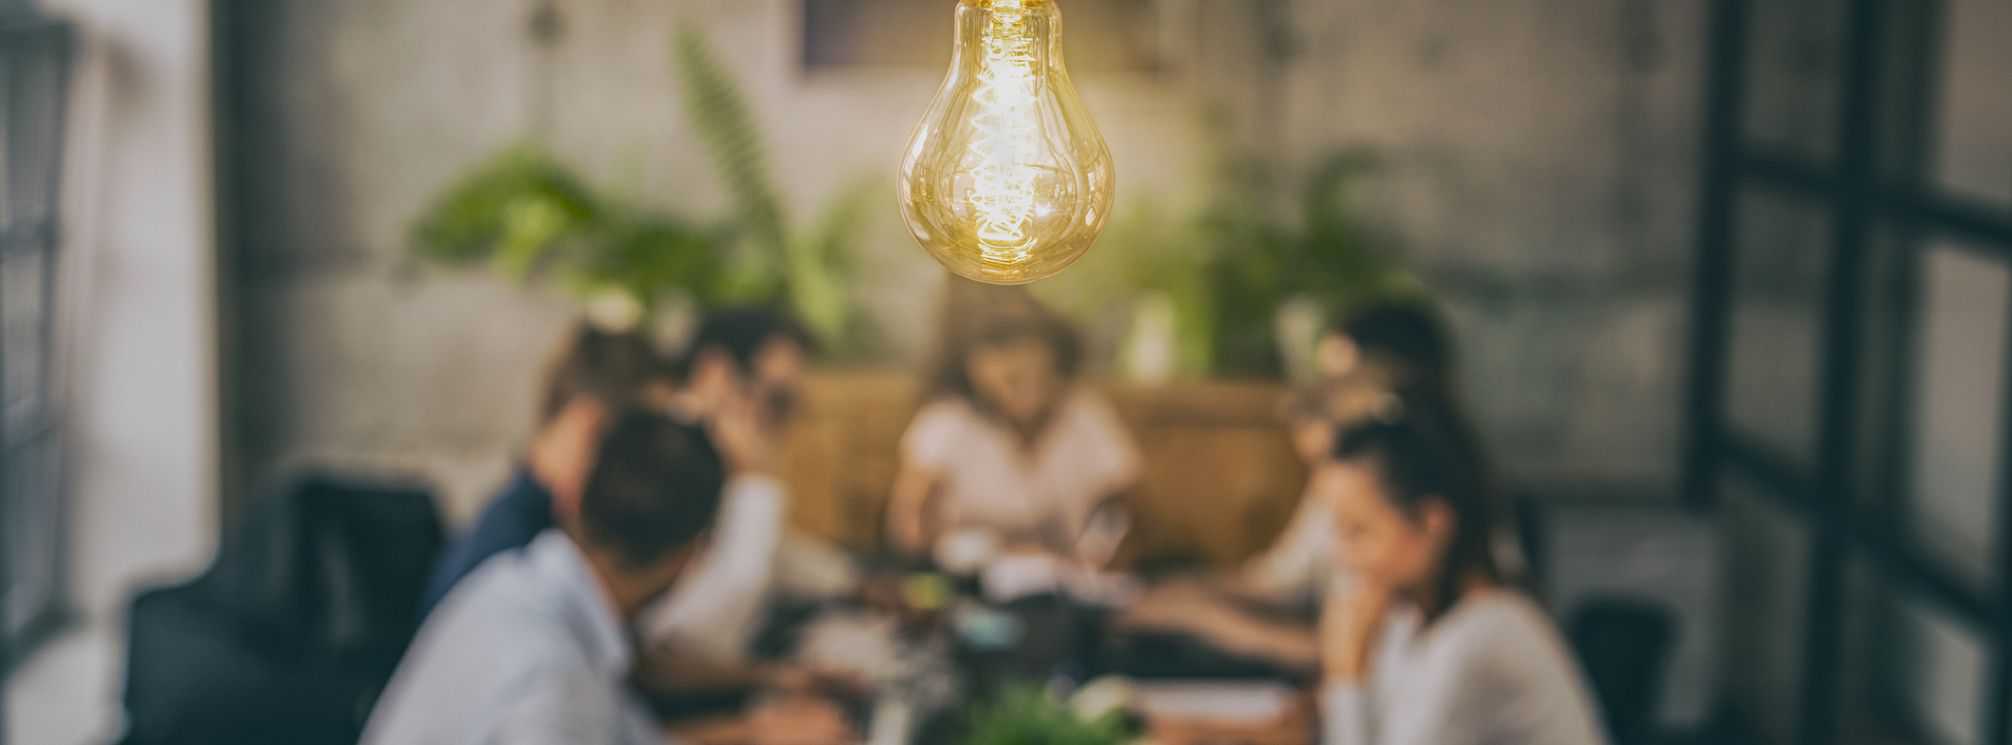 lightbulb going off over a team of people working